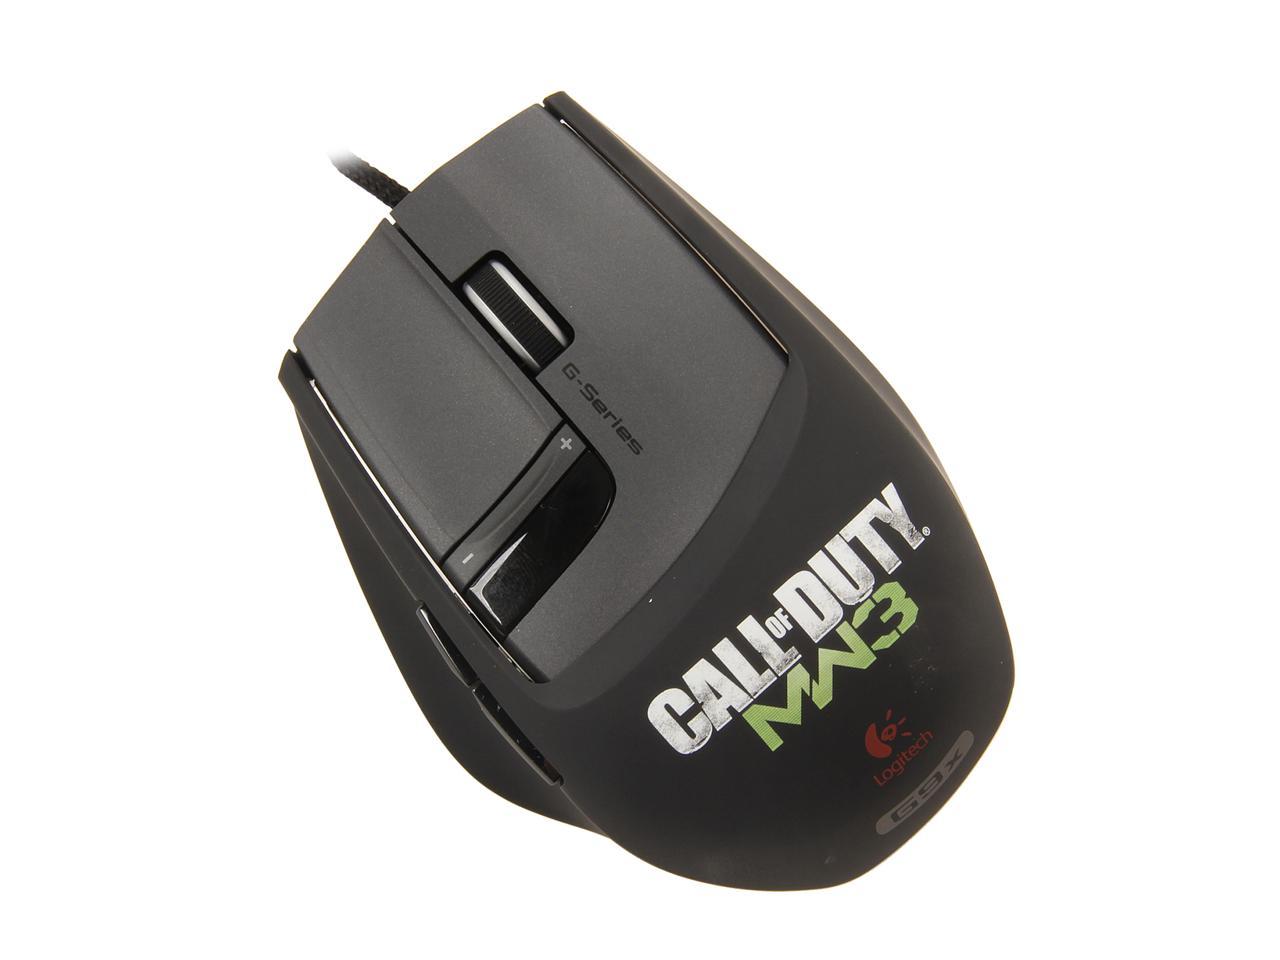 Geef energie Geruststellen Obsessie Refurbished: Logitech Call of Duty: MW3 Edition (G9X) 910-002764 Black  Wired Laser Gaming Mouse - Newegg.com